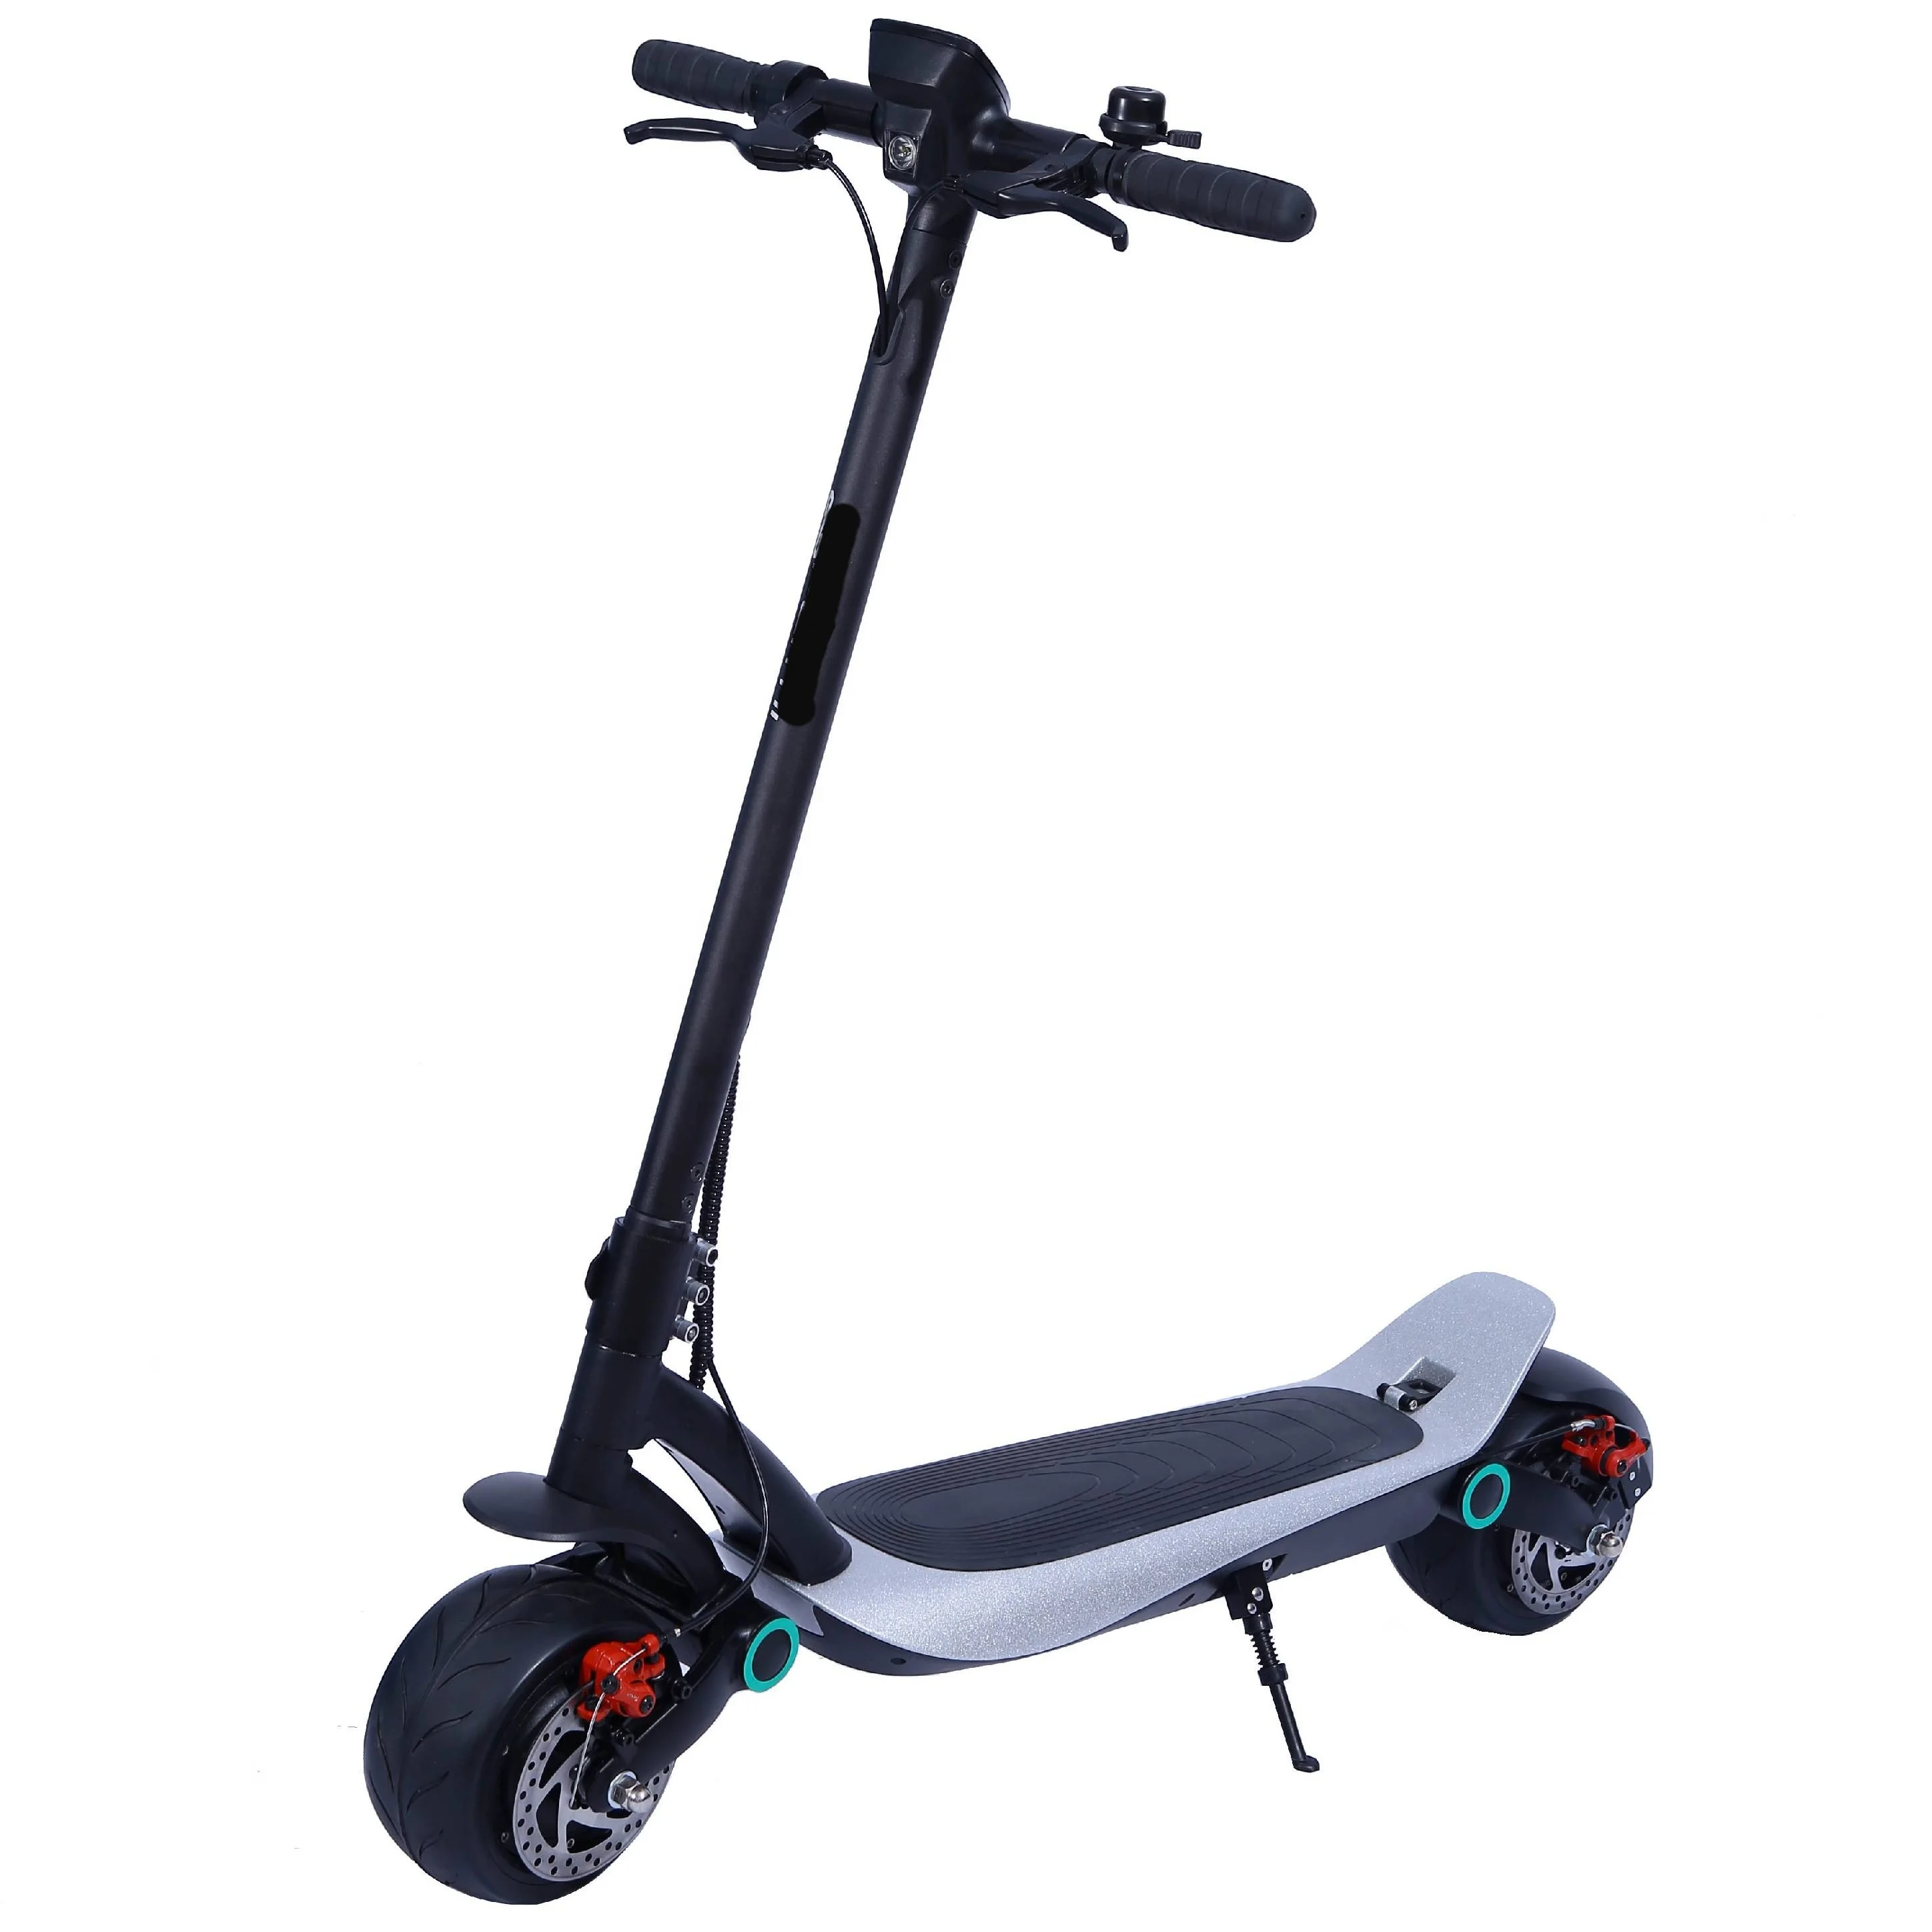 

High Performance 2 Wheel Electric Scooter ES-W1 Pro 600W 50km/h Electric Scooter For Adult, Black and customizek